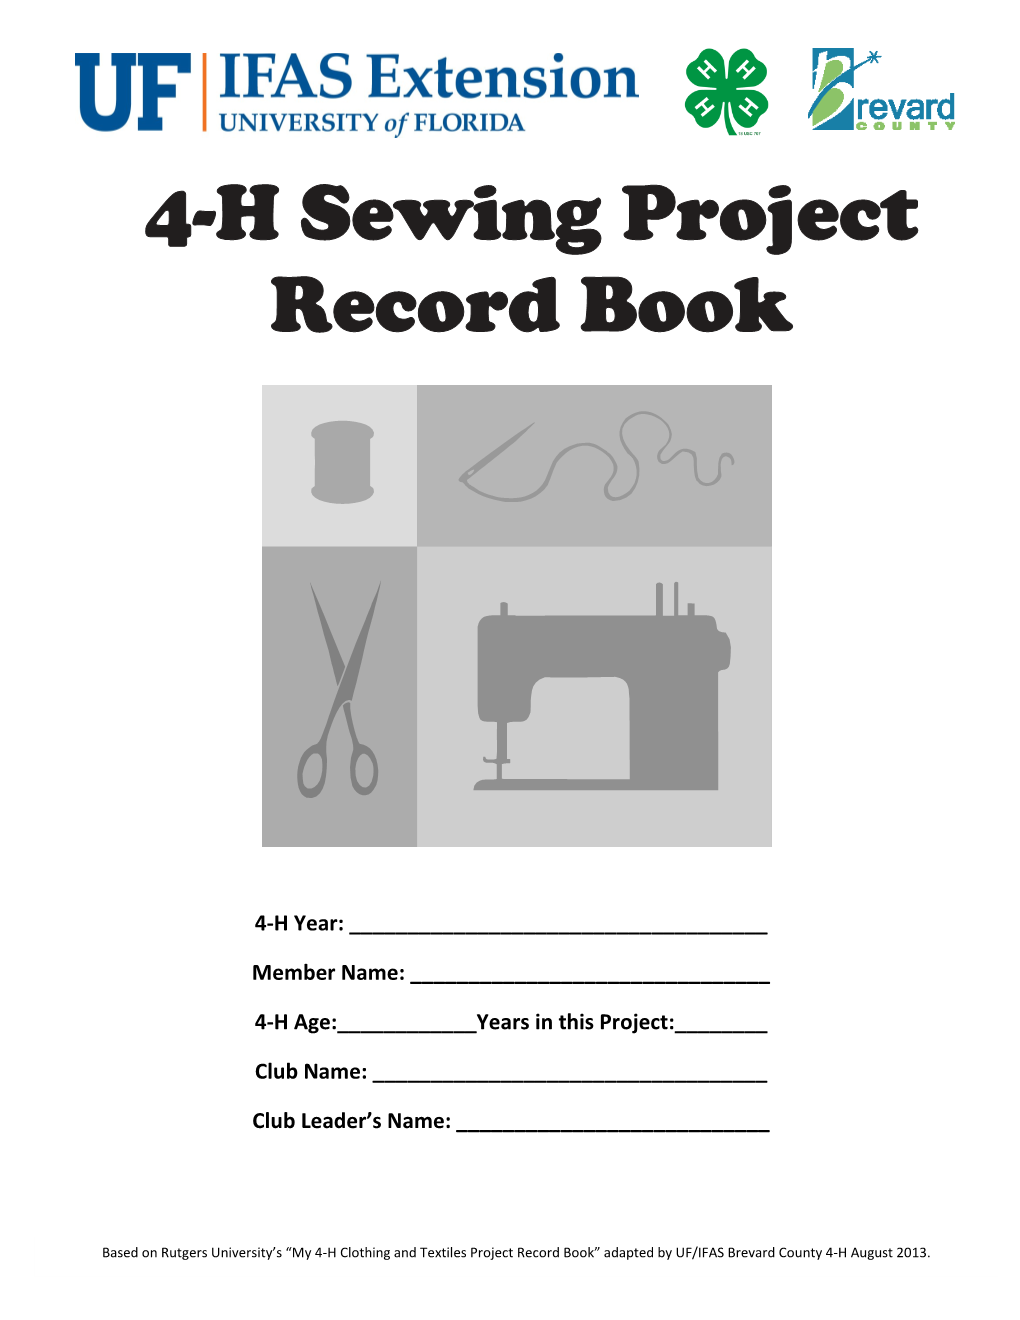 4-H Sewing Project Record Book